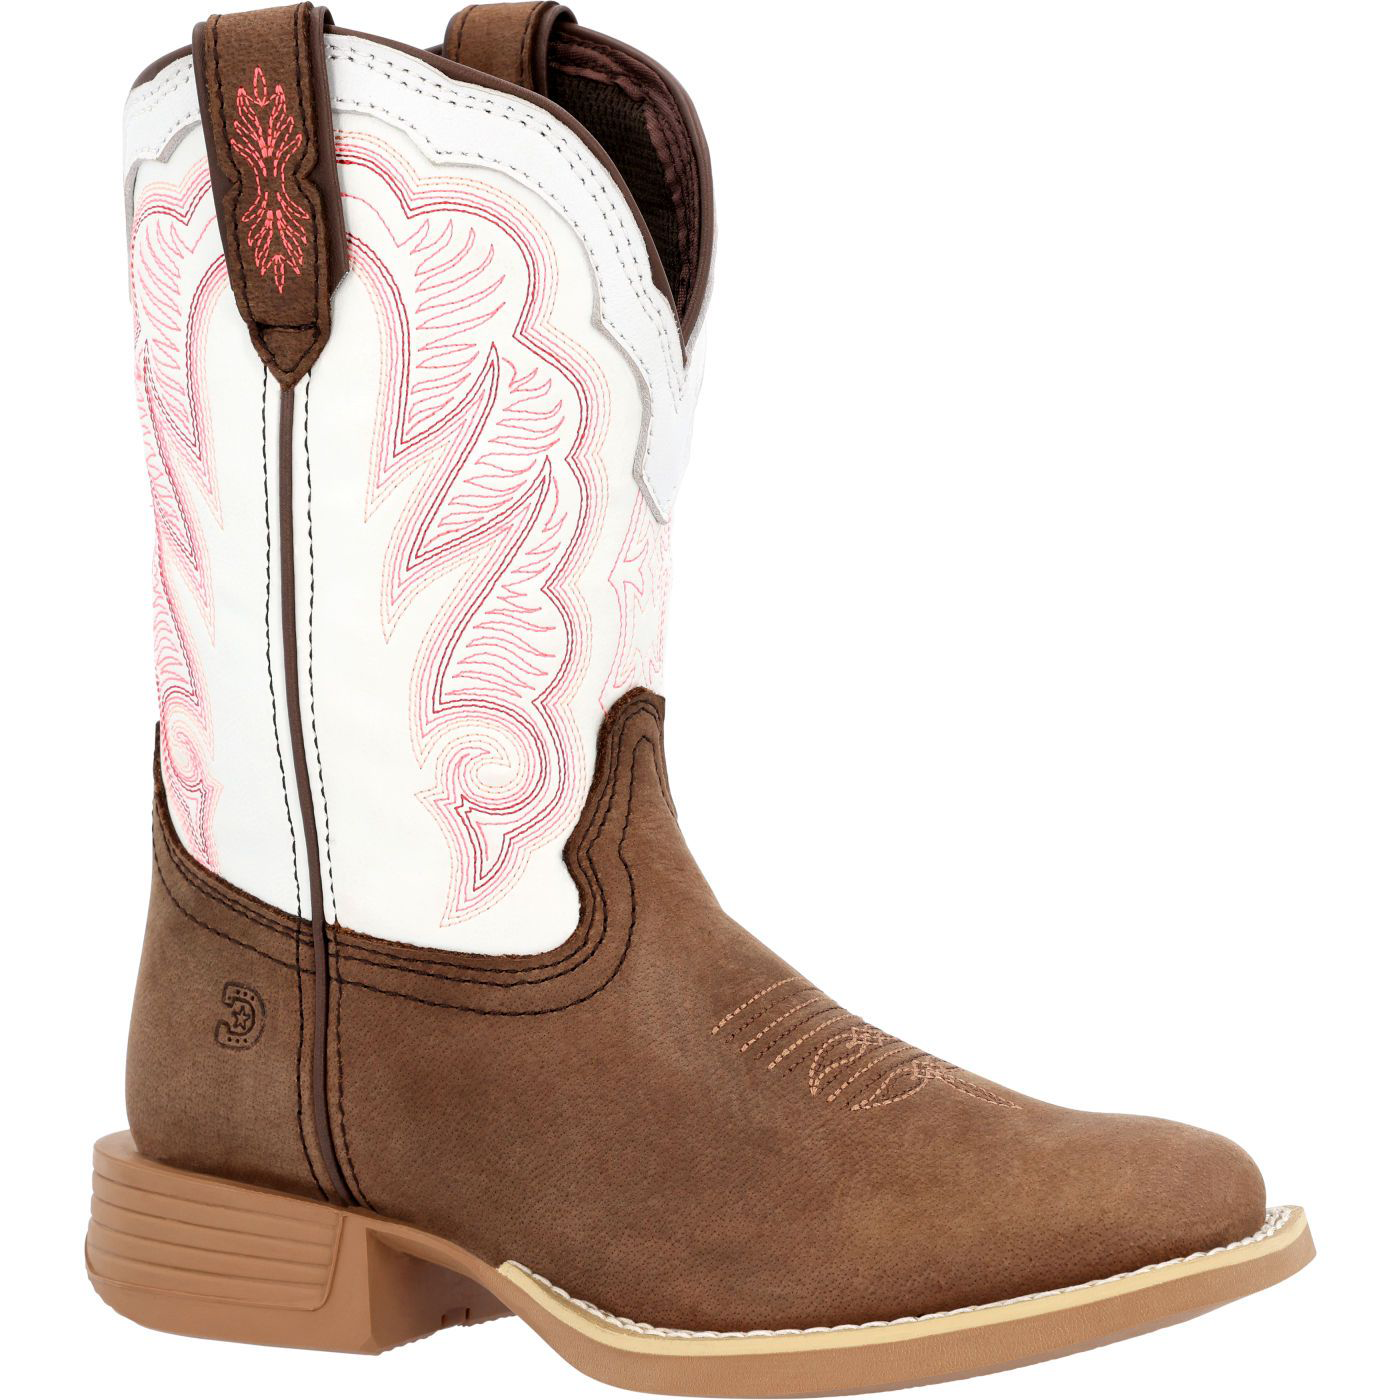 Durango Lil' Rebel Pro Brown and White Western Boots for Kids - Trail Brown/White - 1 Kids